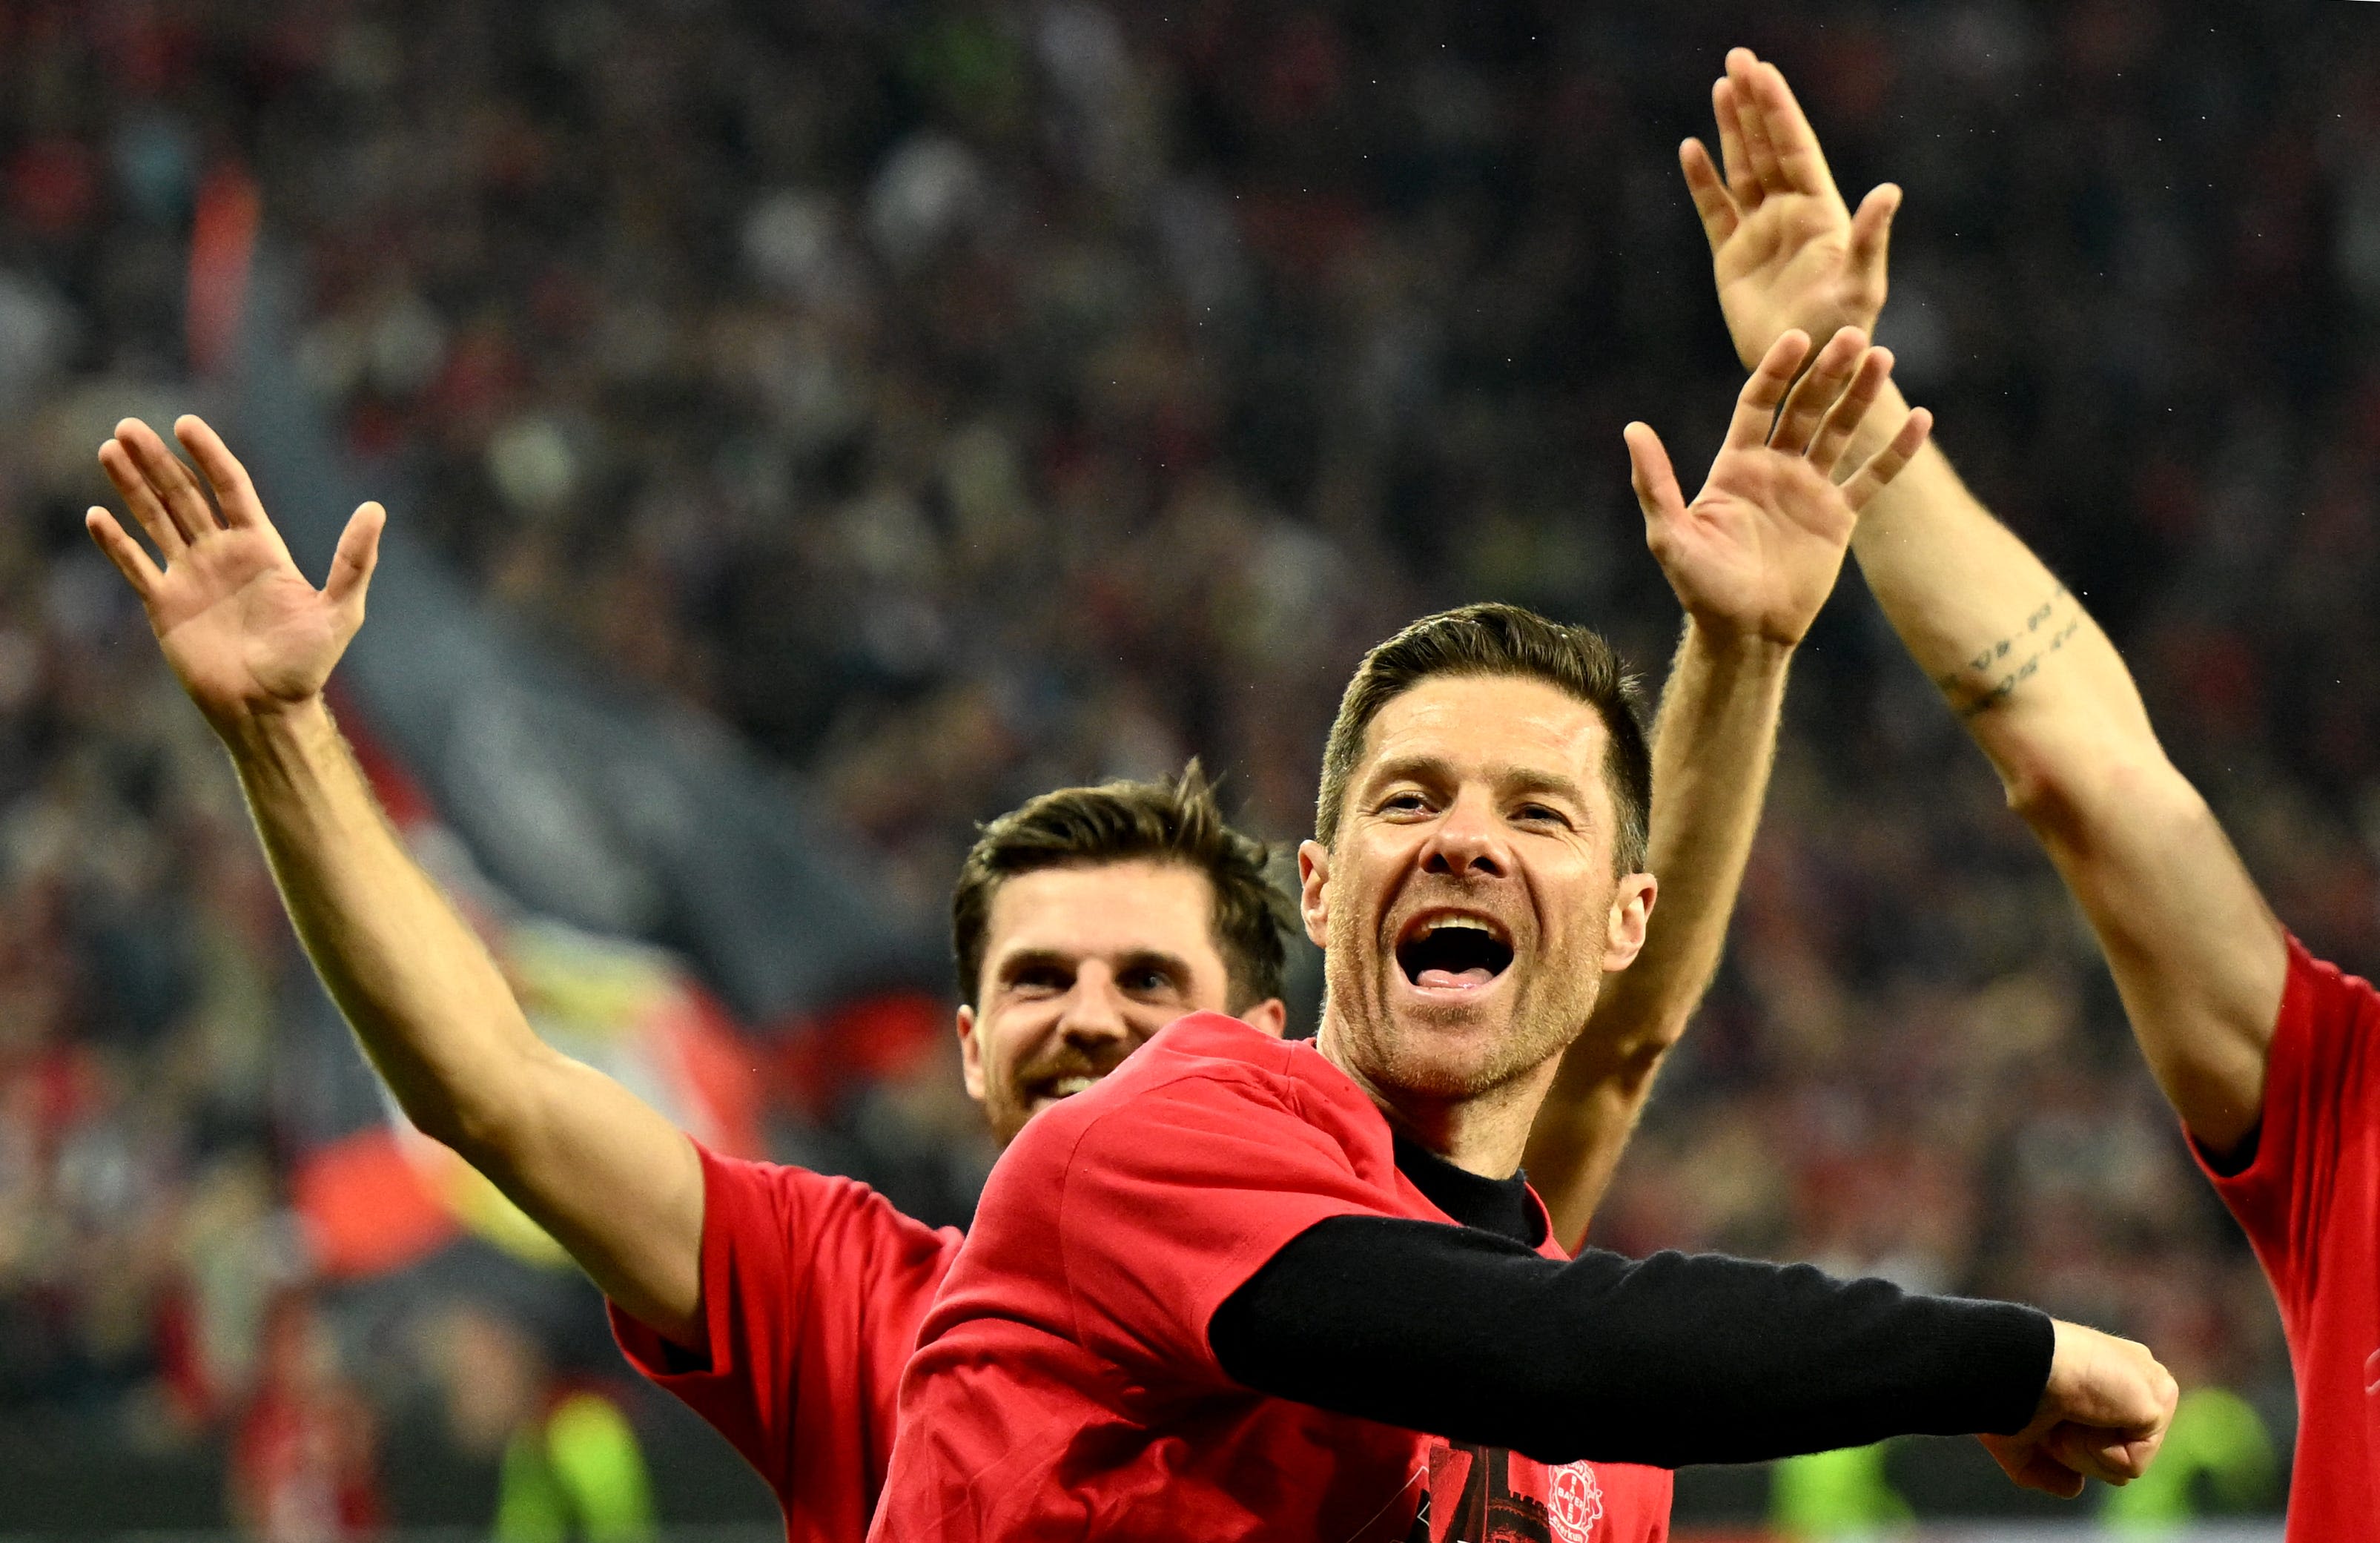 Bayer Leverkusen advances to UEFA Europa League final, play 49th match without defeat